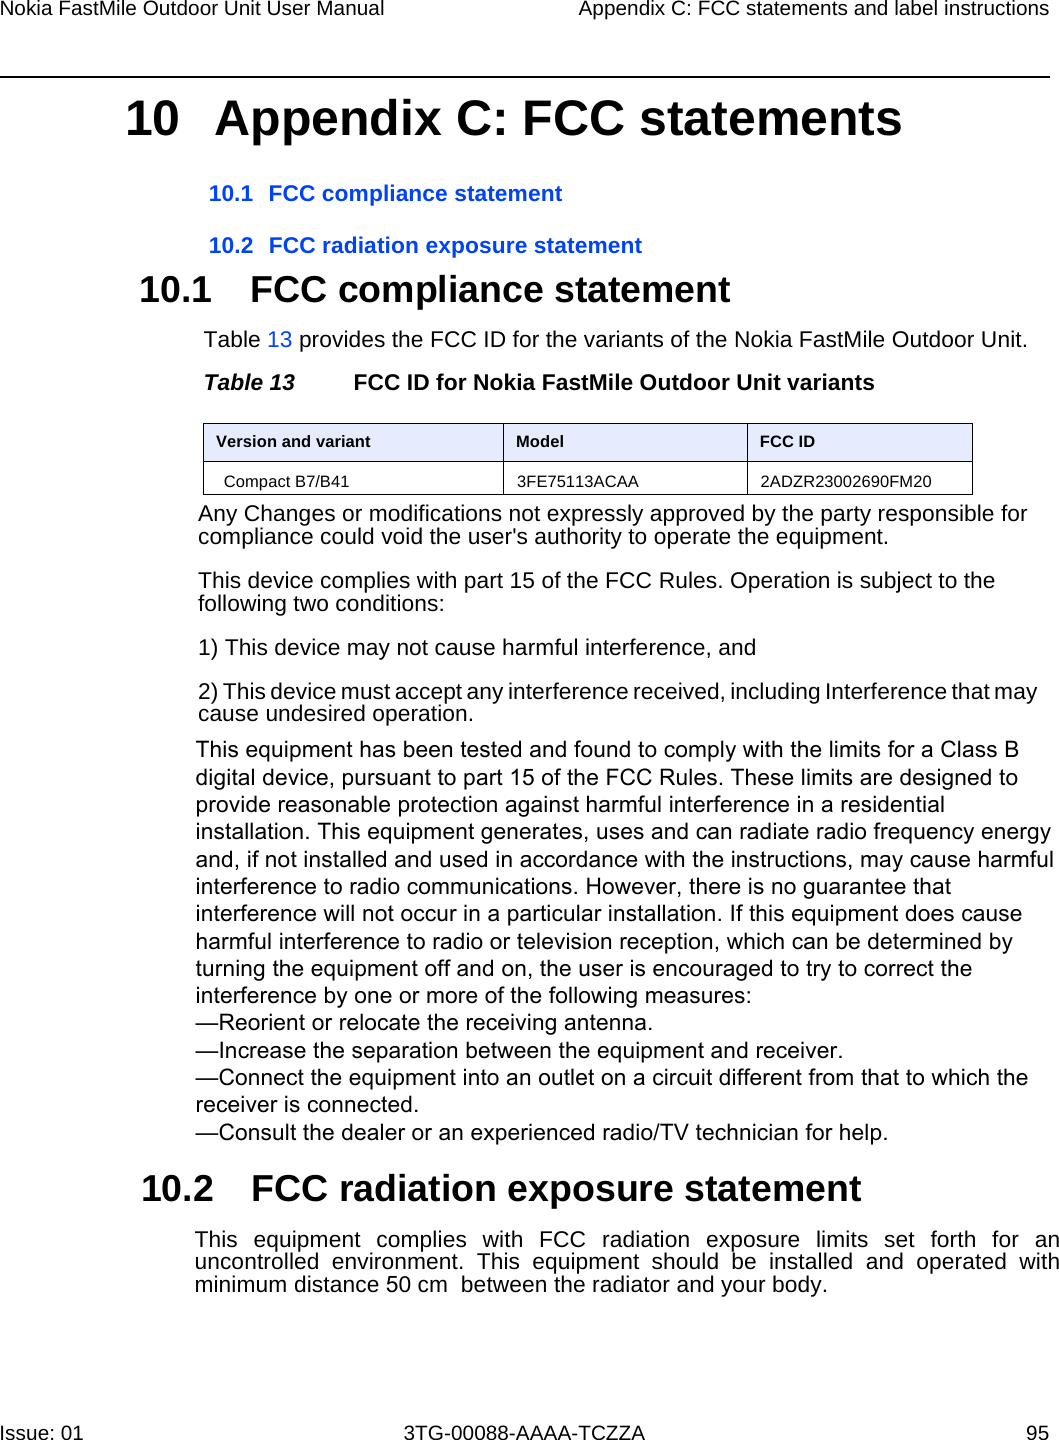 Compact B7/B41              3FE75113ACAA 2ADZR23002690FM20Nokia FastMile Outdoor Unit User Manual Appendix C: FCC statements and label instructionsIssue: 01 3TG-00088-AAAA-TCZZA 9510 Appendix C: FCC statements  10.1 FCC compliance statement10.2 FCC radiation exposure statement 10.1 FCC compliance statementTable 13 provides the FCC ID for the variants of the Nokia FastMile Outdoor Unit.Table 13 FCC ID for Nokia FastMile Outdoor Unit variantsAny Changes or modifications not expressly approved by the party responsible for compliance could void the user&apos;s authority to operate the equipment. This device complies with part 15 of the FCC Rules. Operation is subject to the following two conditions: 1) This device may not cause harmful interference, and2) This device must accept any interference received, including Interference that may cause undesired operation.10.2 FCC radiation exposure statementThis  equipment  complies with  FCC radiation  exposure  limits  set  forth  for an uncontrolled  environment.  This  equipment  should  be  installed  and  operated  with minimum distance 50 cm  between the radiator and your body. Version and variant Model FCC IDThis equipment has been tested and found to comply with the limits for a Class B digital device, pursuant to part 15 of the FCC Rules. These limits are designed to provide reasonable protection against harmful interference in a residential installation. This equipment generates, uses and can radiate radio frequency energy and, if not installed and used in accordance with the instructions, may cause harmful interference to radio communications. However, there is no guarantee that interference will not occur in a particular installation. If this equipment does cause harmful interference to radio or television reception, which can be determined by turning the equipment off and on, the user is encouraged to try to correct the interference by one or more of the following measures:—Reorient or relocate the receiving antenna.—Increase the separation between the equipment and receiver.—Connect the equipment into an outlet on a circuit different from that to which the   receiver is connected.—Consult the dealer or an experienced radio/TV technician for help.